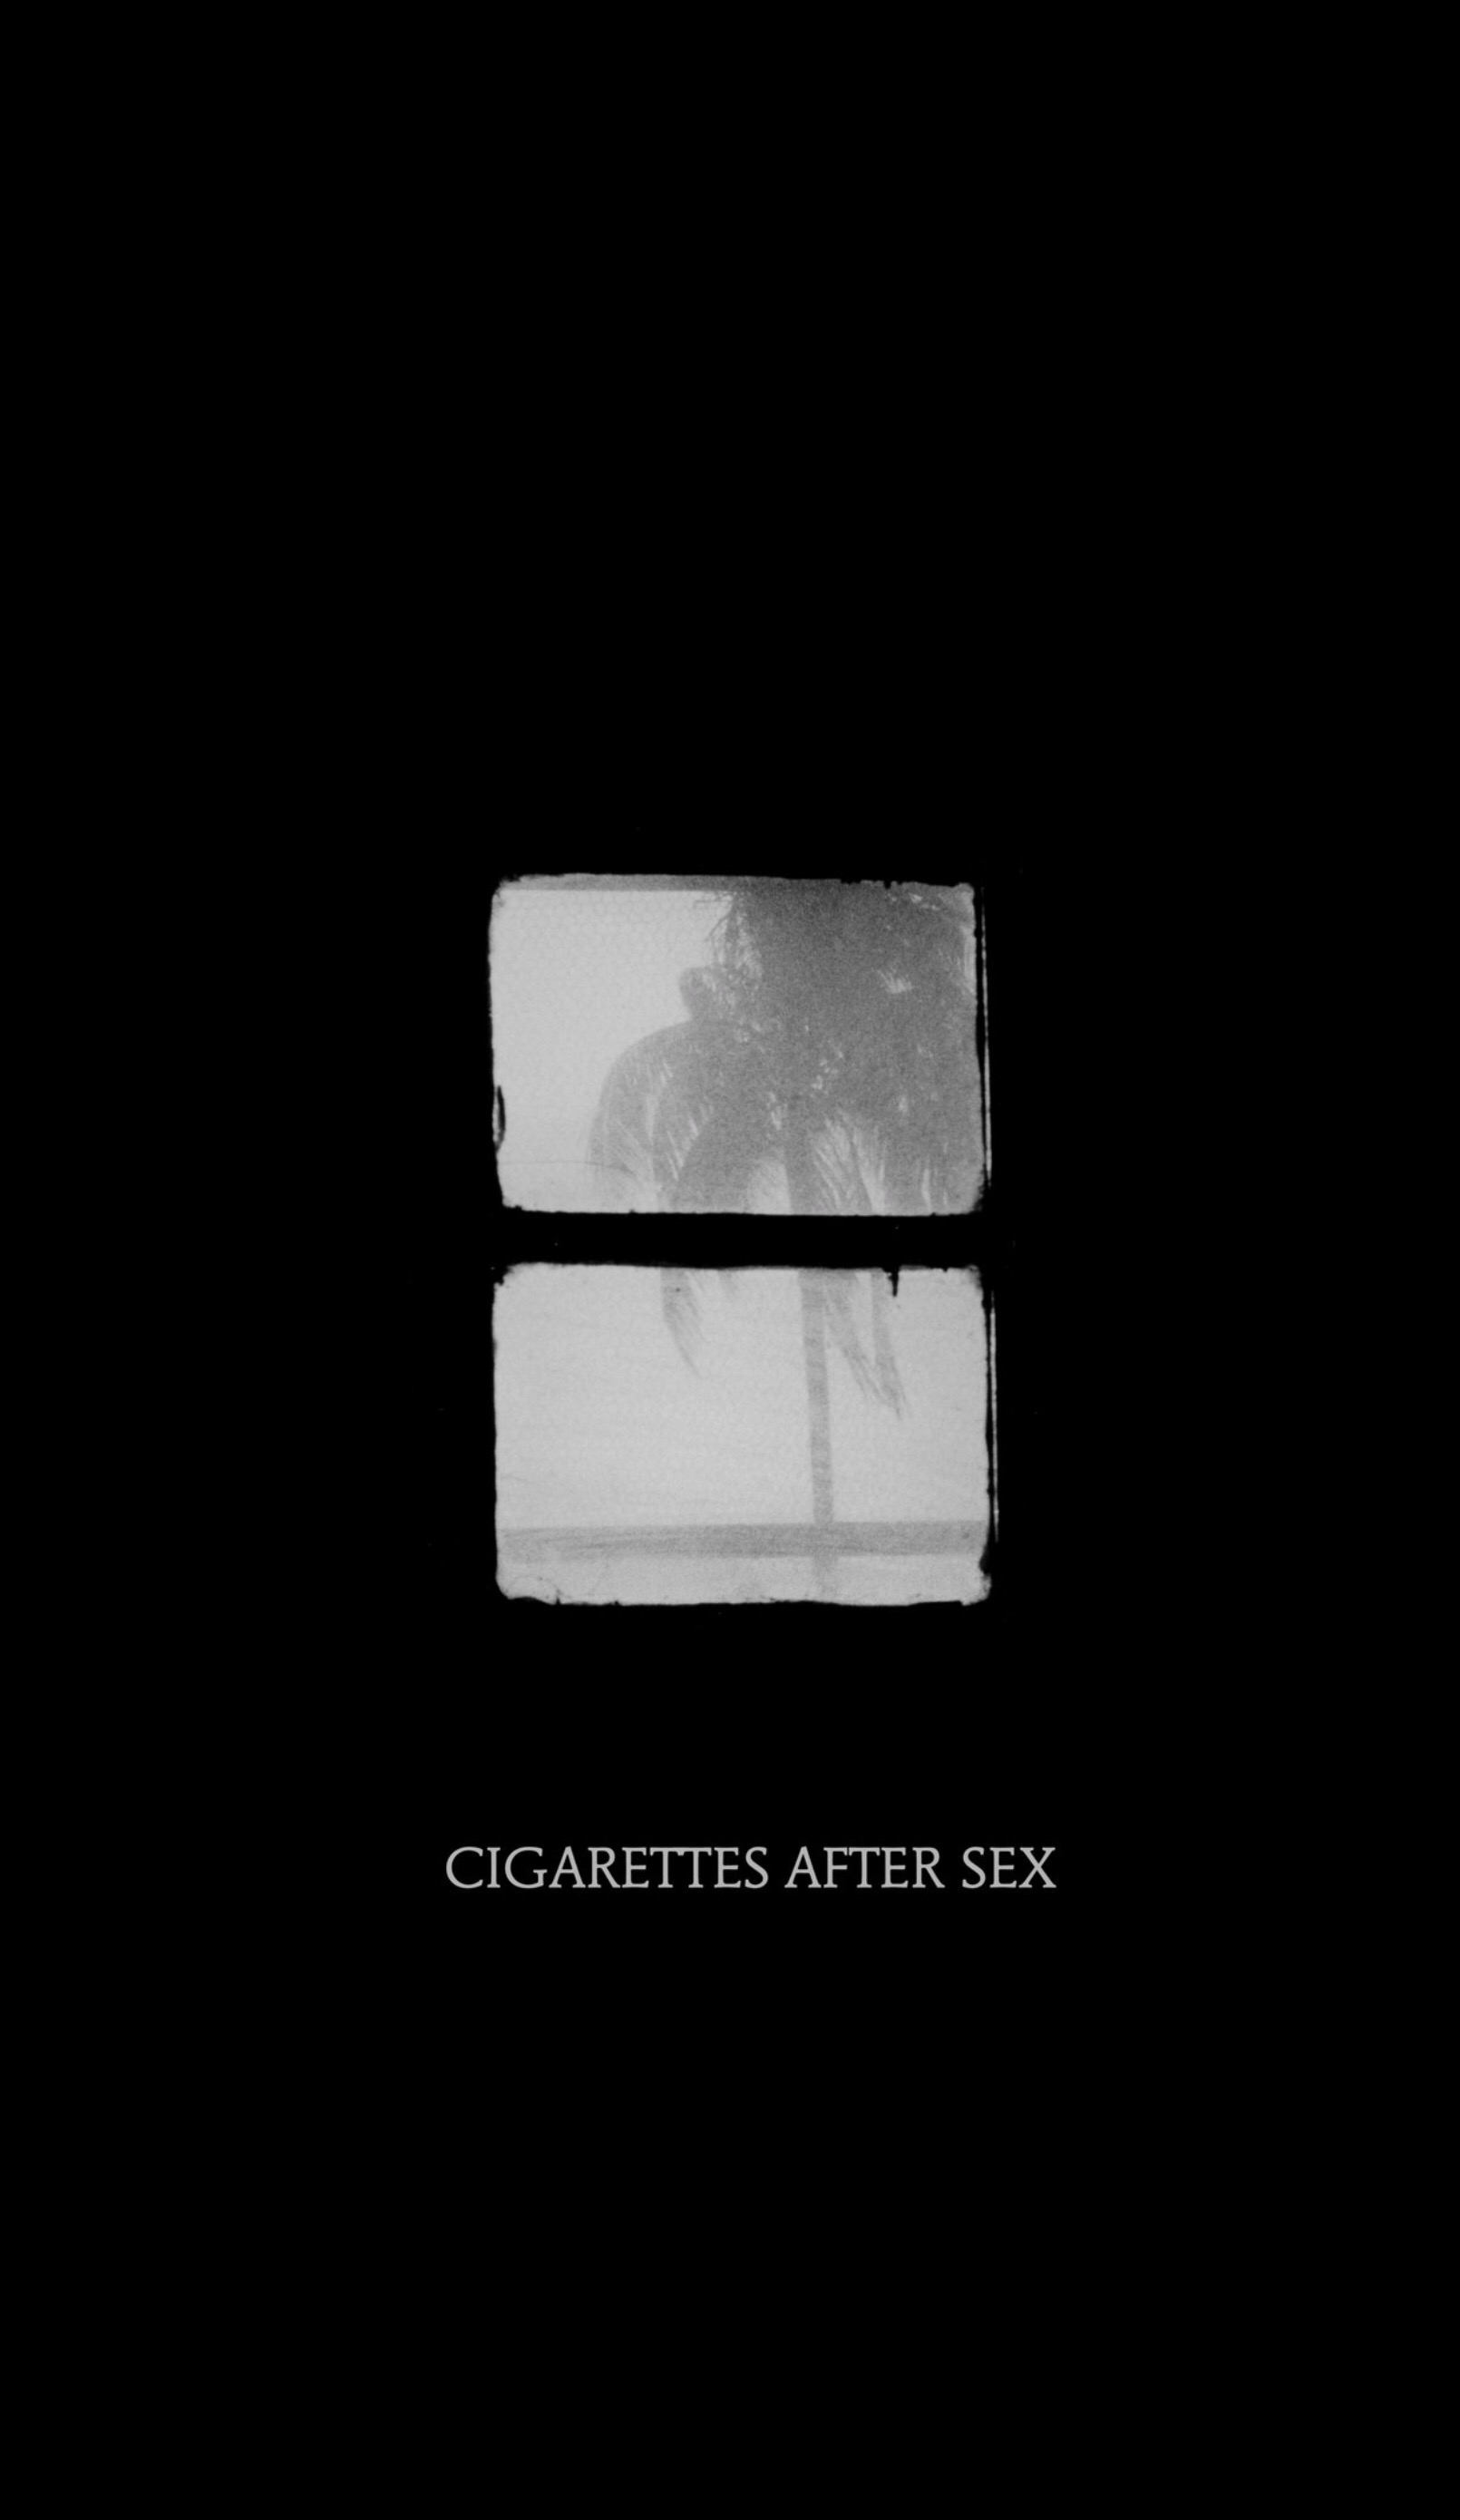 This visual is about cigarettesaftersex #cigarettesaftersex.